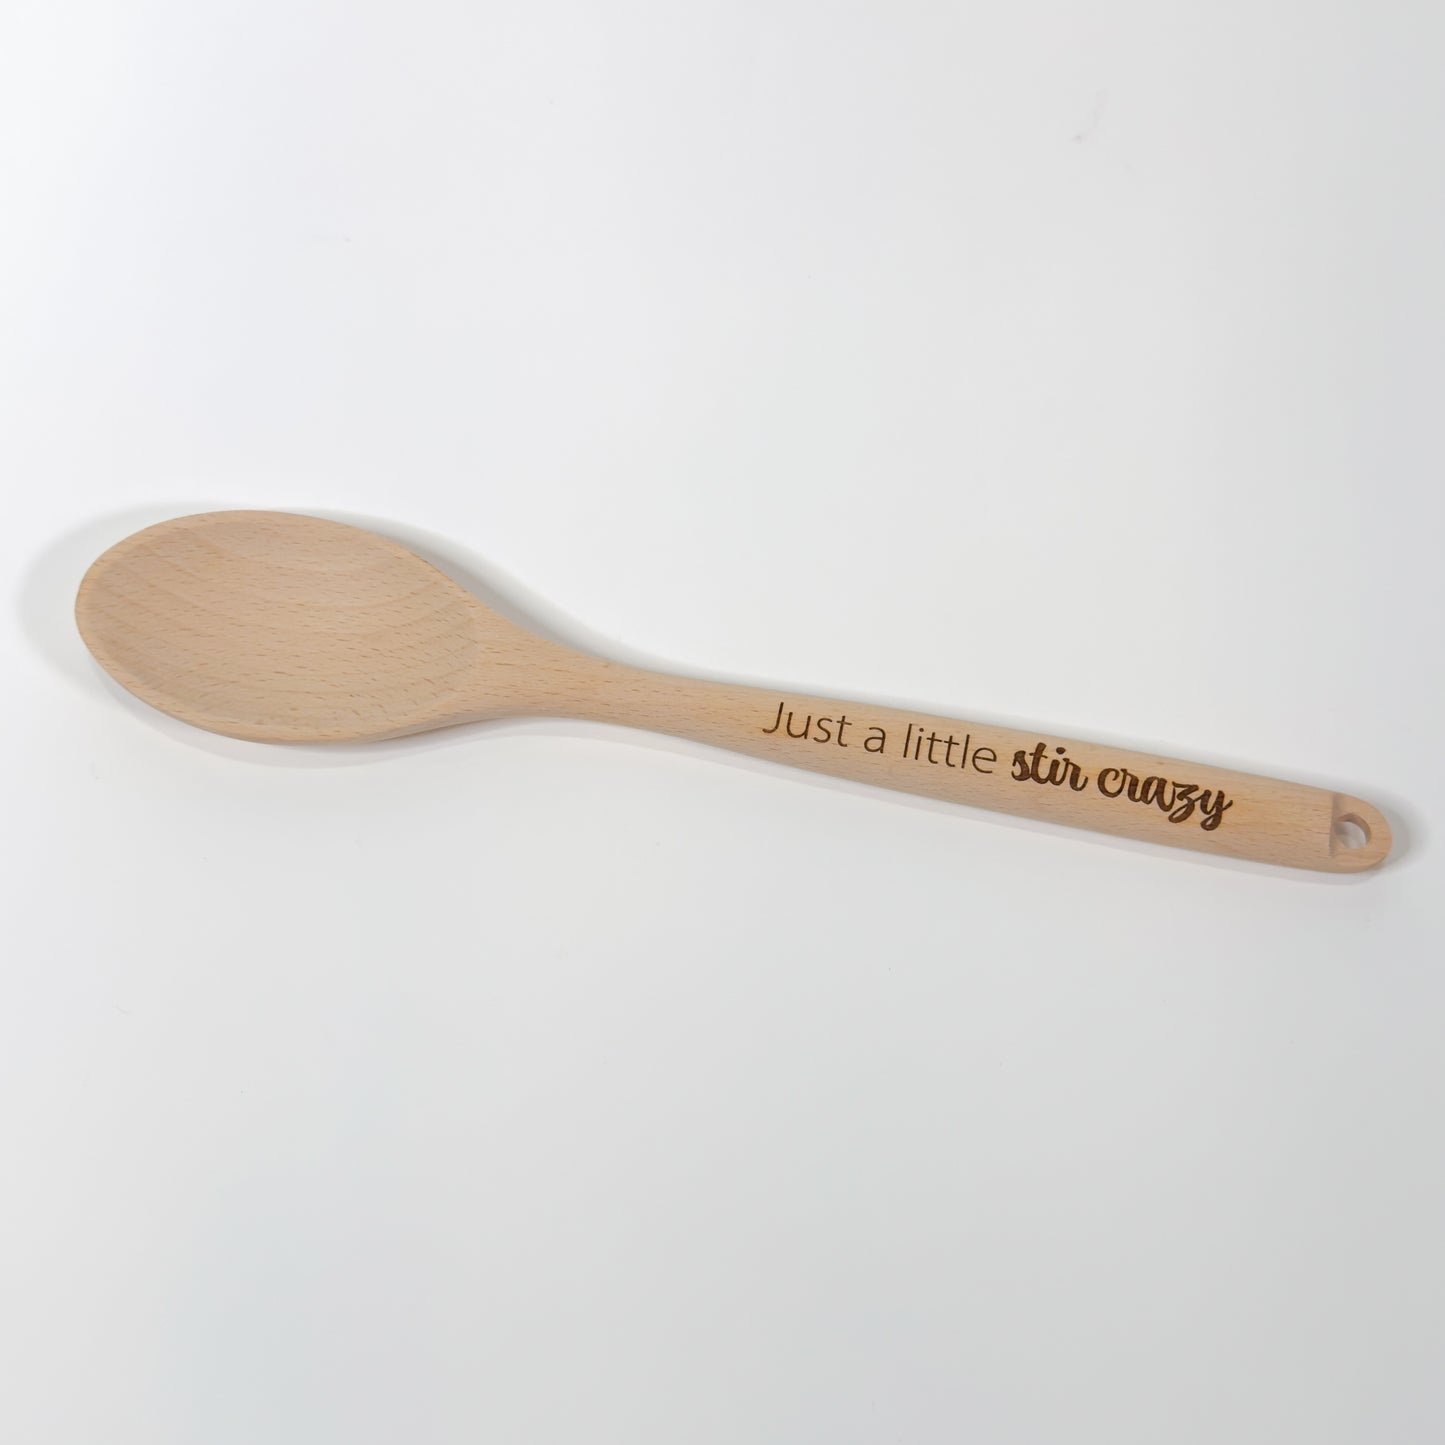 Engraved Wood Spoon, “Just a little stir crazy”